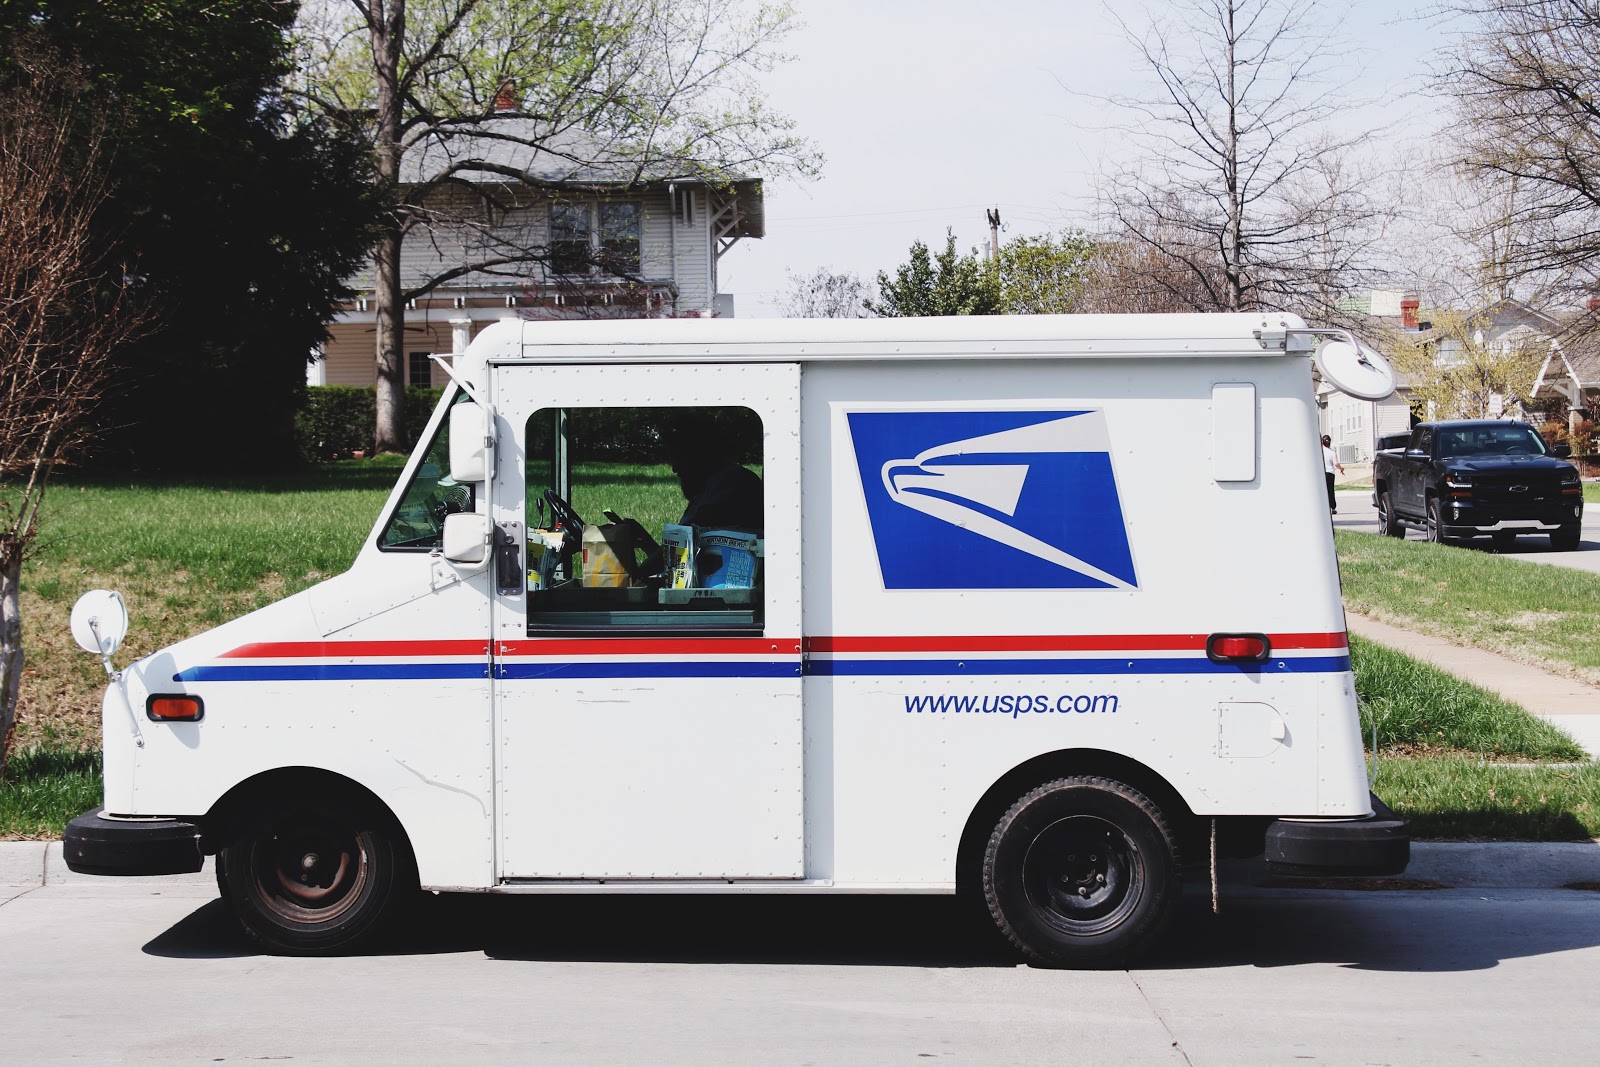 Voting by Mail Pros and Cons - Should You Vote by Mail in 2020?